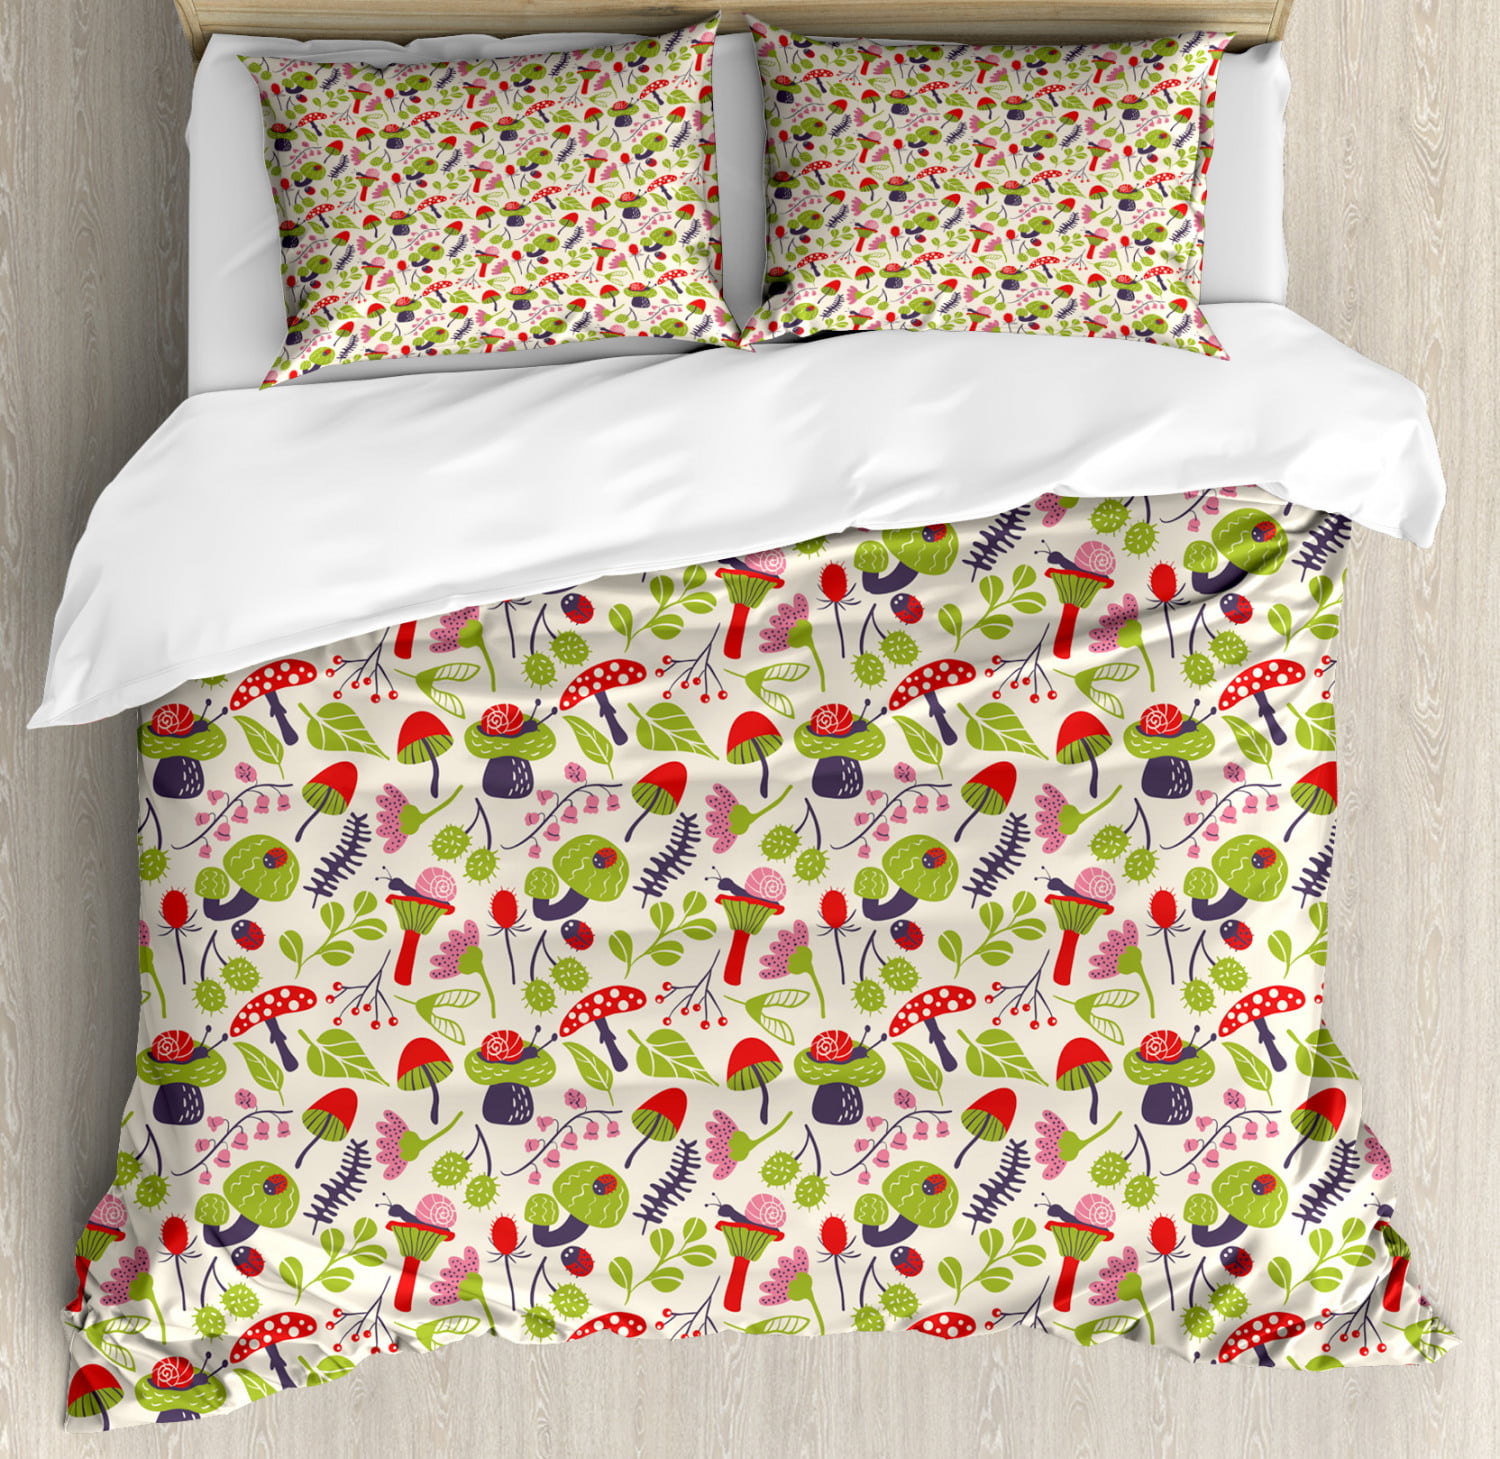 Nature Duvet Cover Set with Pillow Shams Ladybug on Water Image Print 